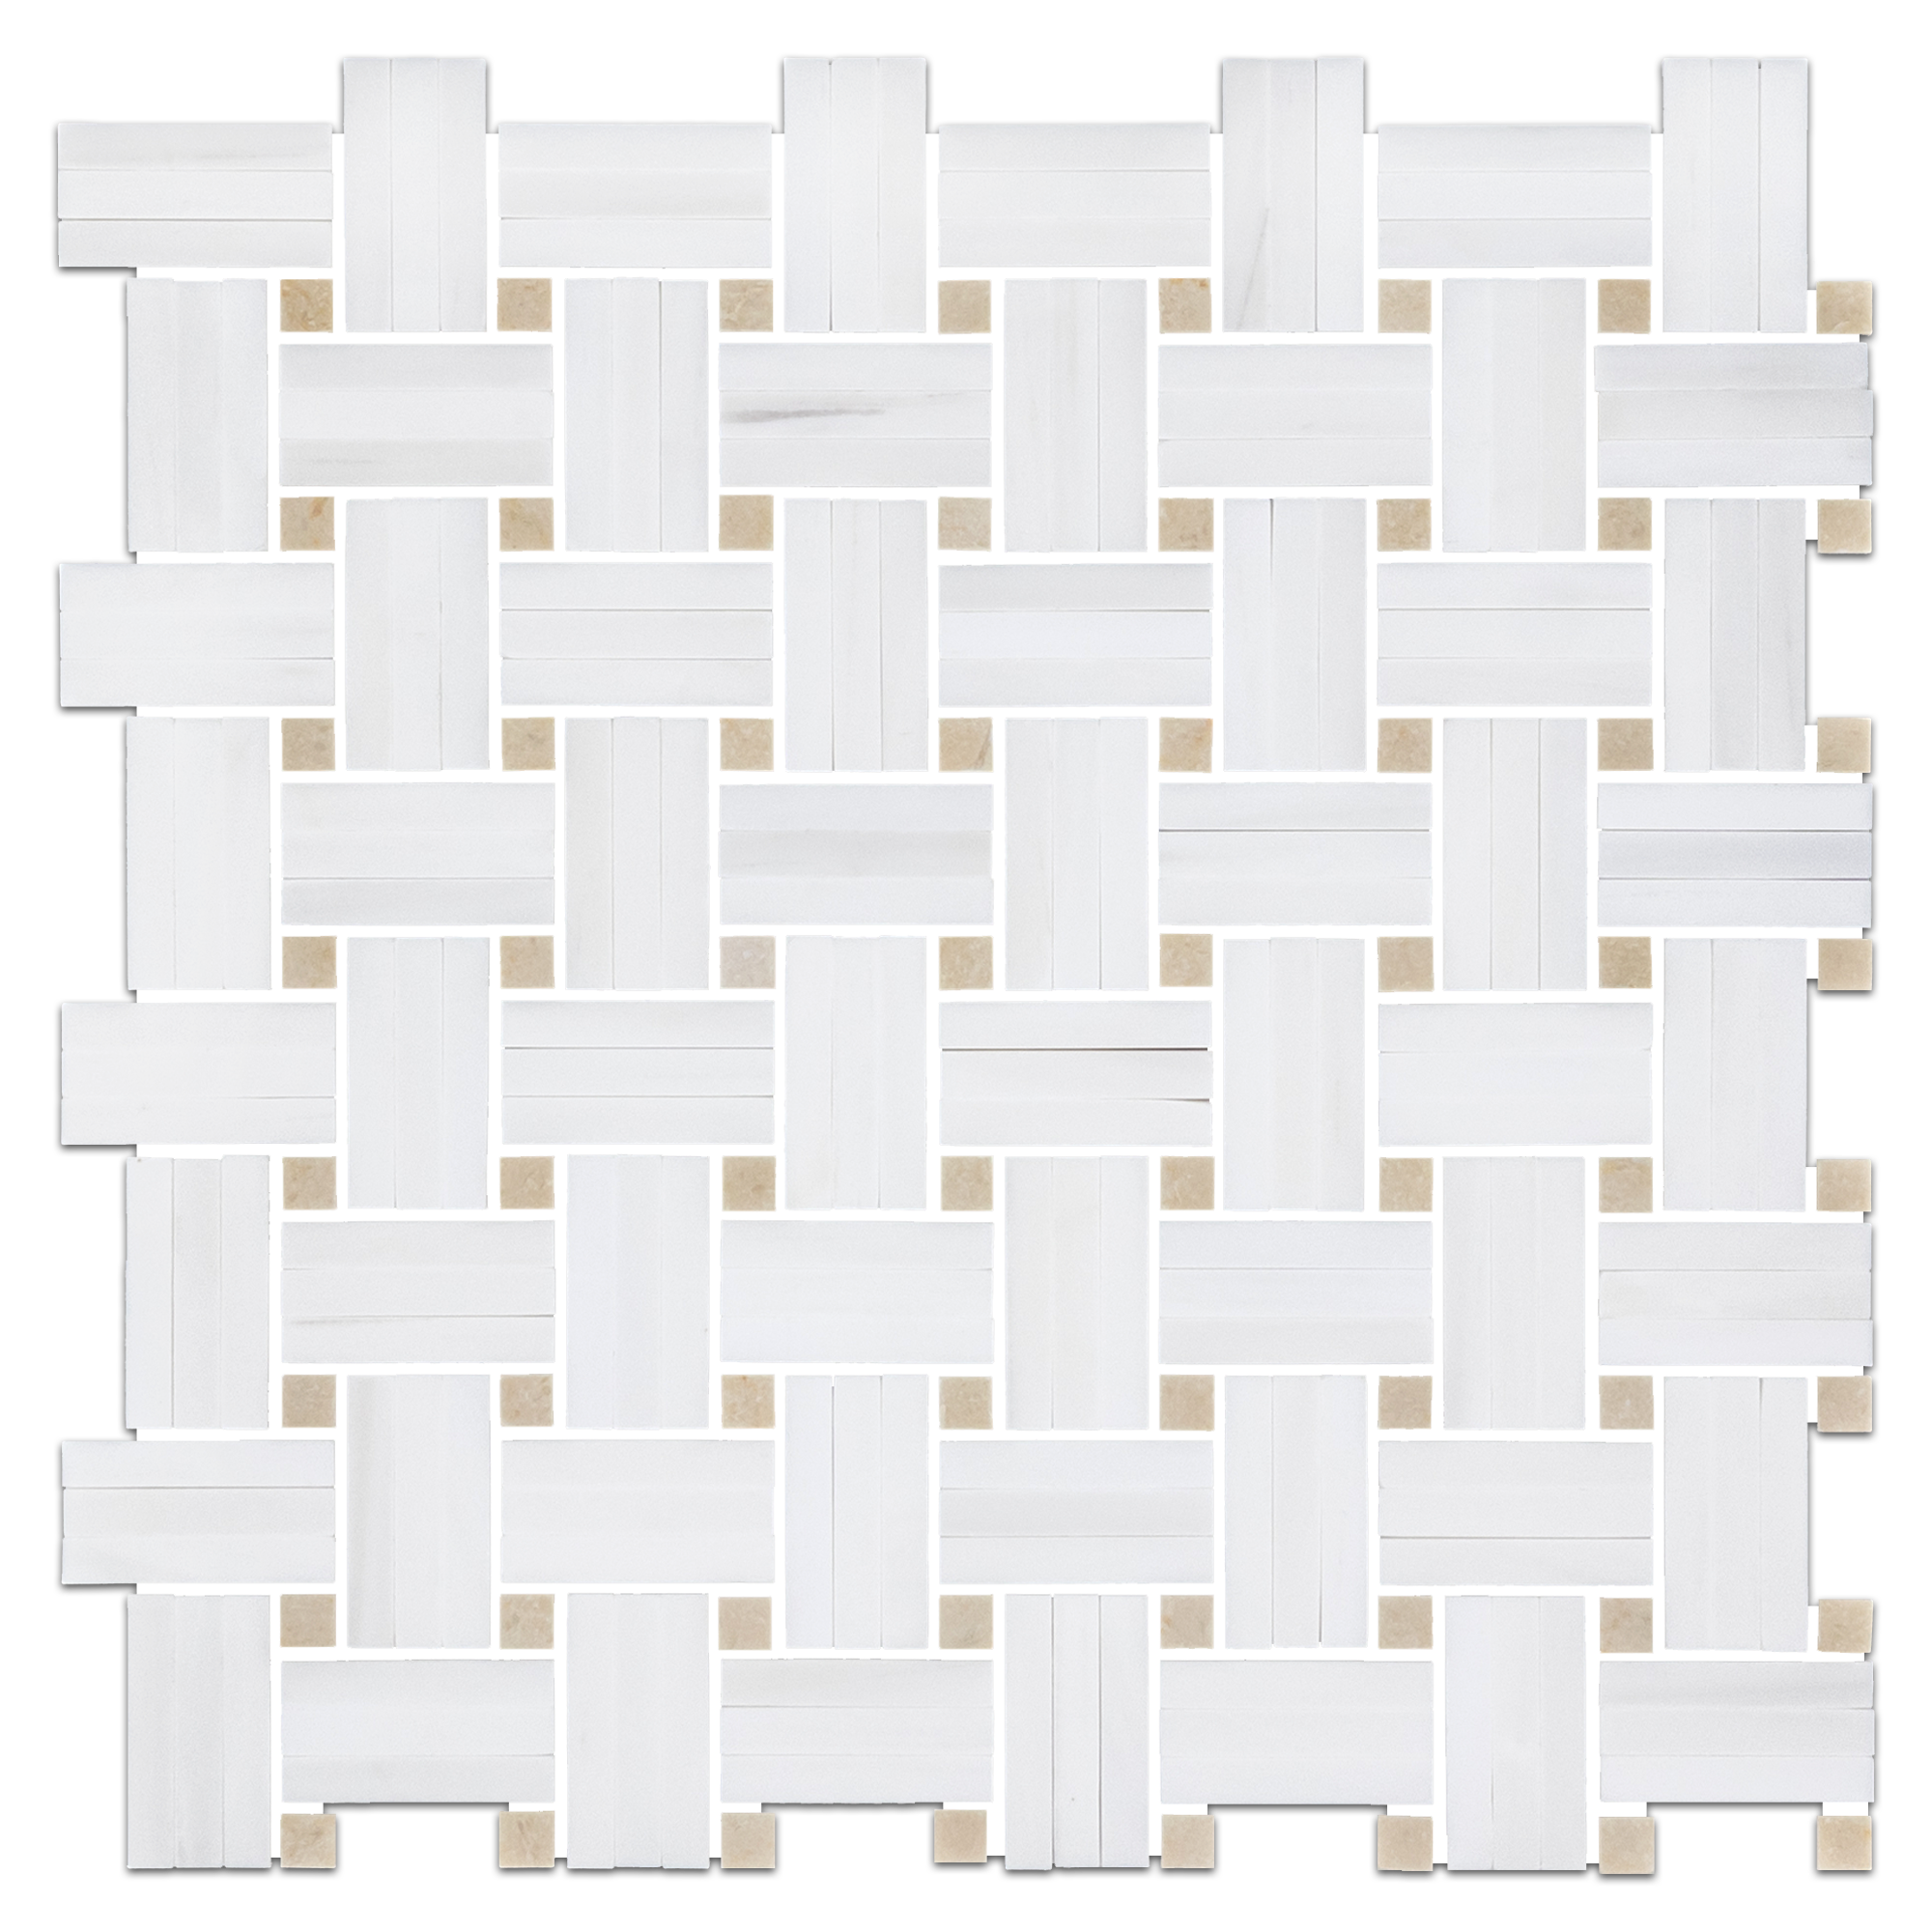 Elon Dolomite Crema Marfil Marble Tri Weave Basketweave Field Mosaic 12x12x0.375 Honed Tile by Surface Group International